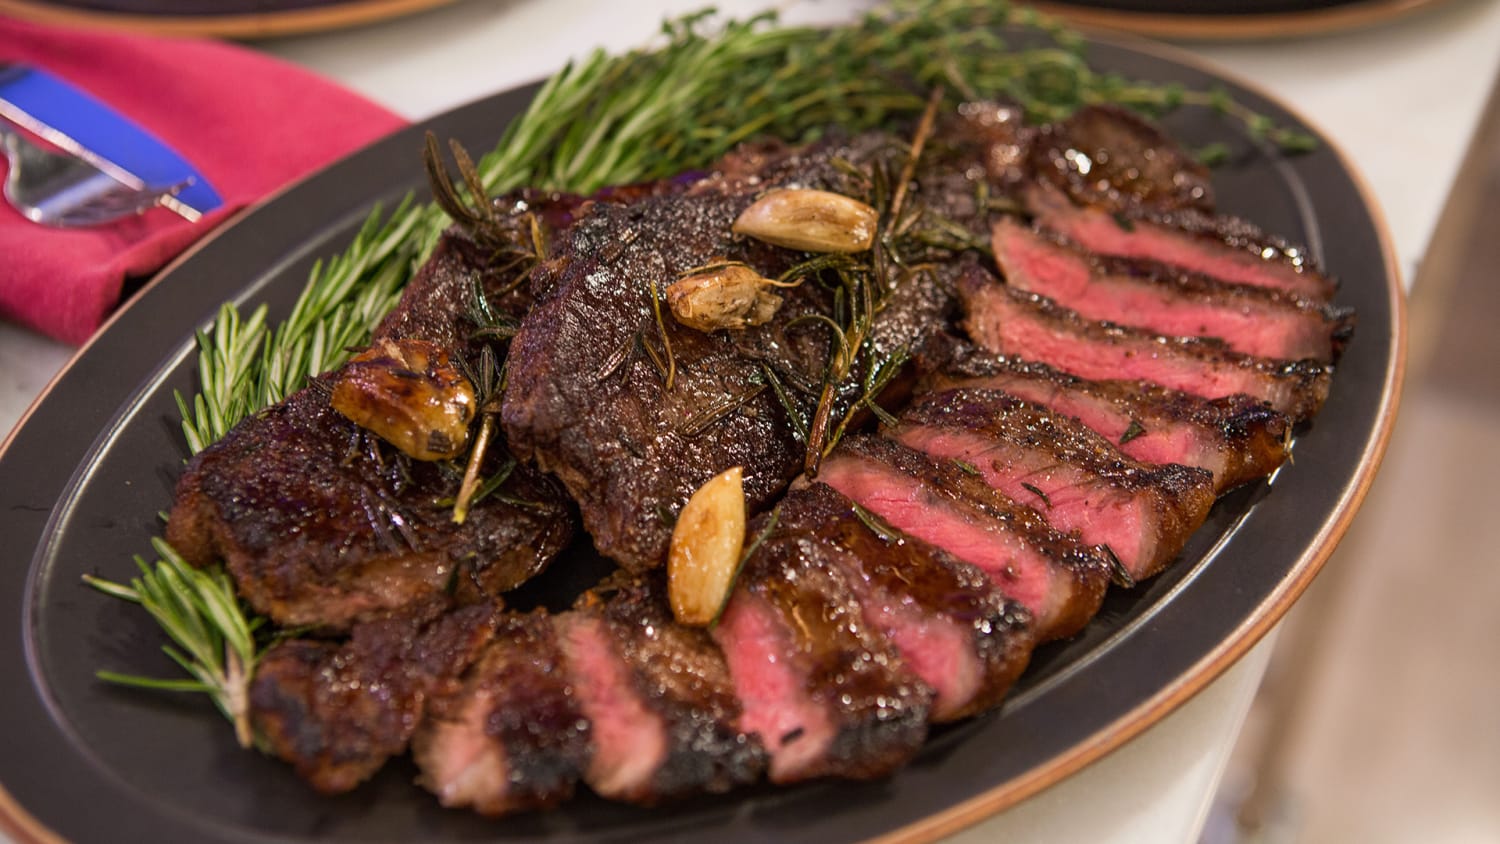 delikat malm Implement Pan-Seared Steaks with Red Wine Sauce Recipe